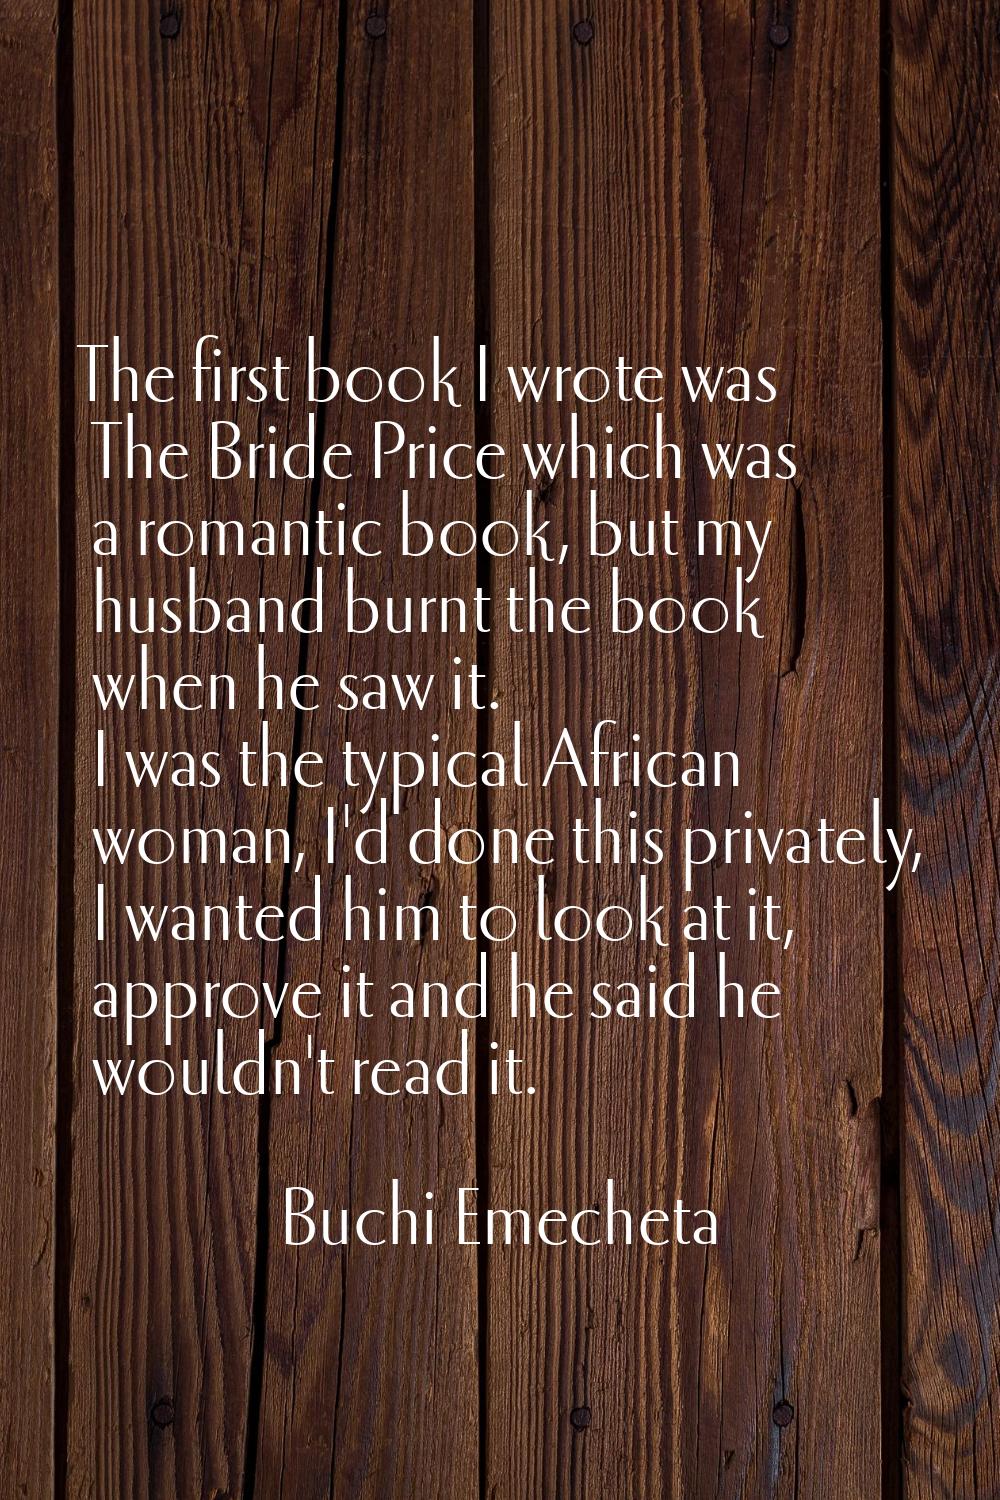 The first book I wrote was The Bride Price which was a romantic book, but my husband burnt the book